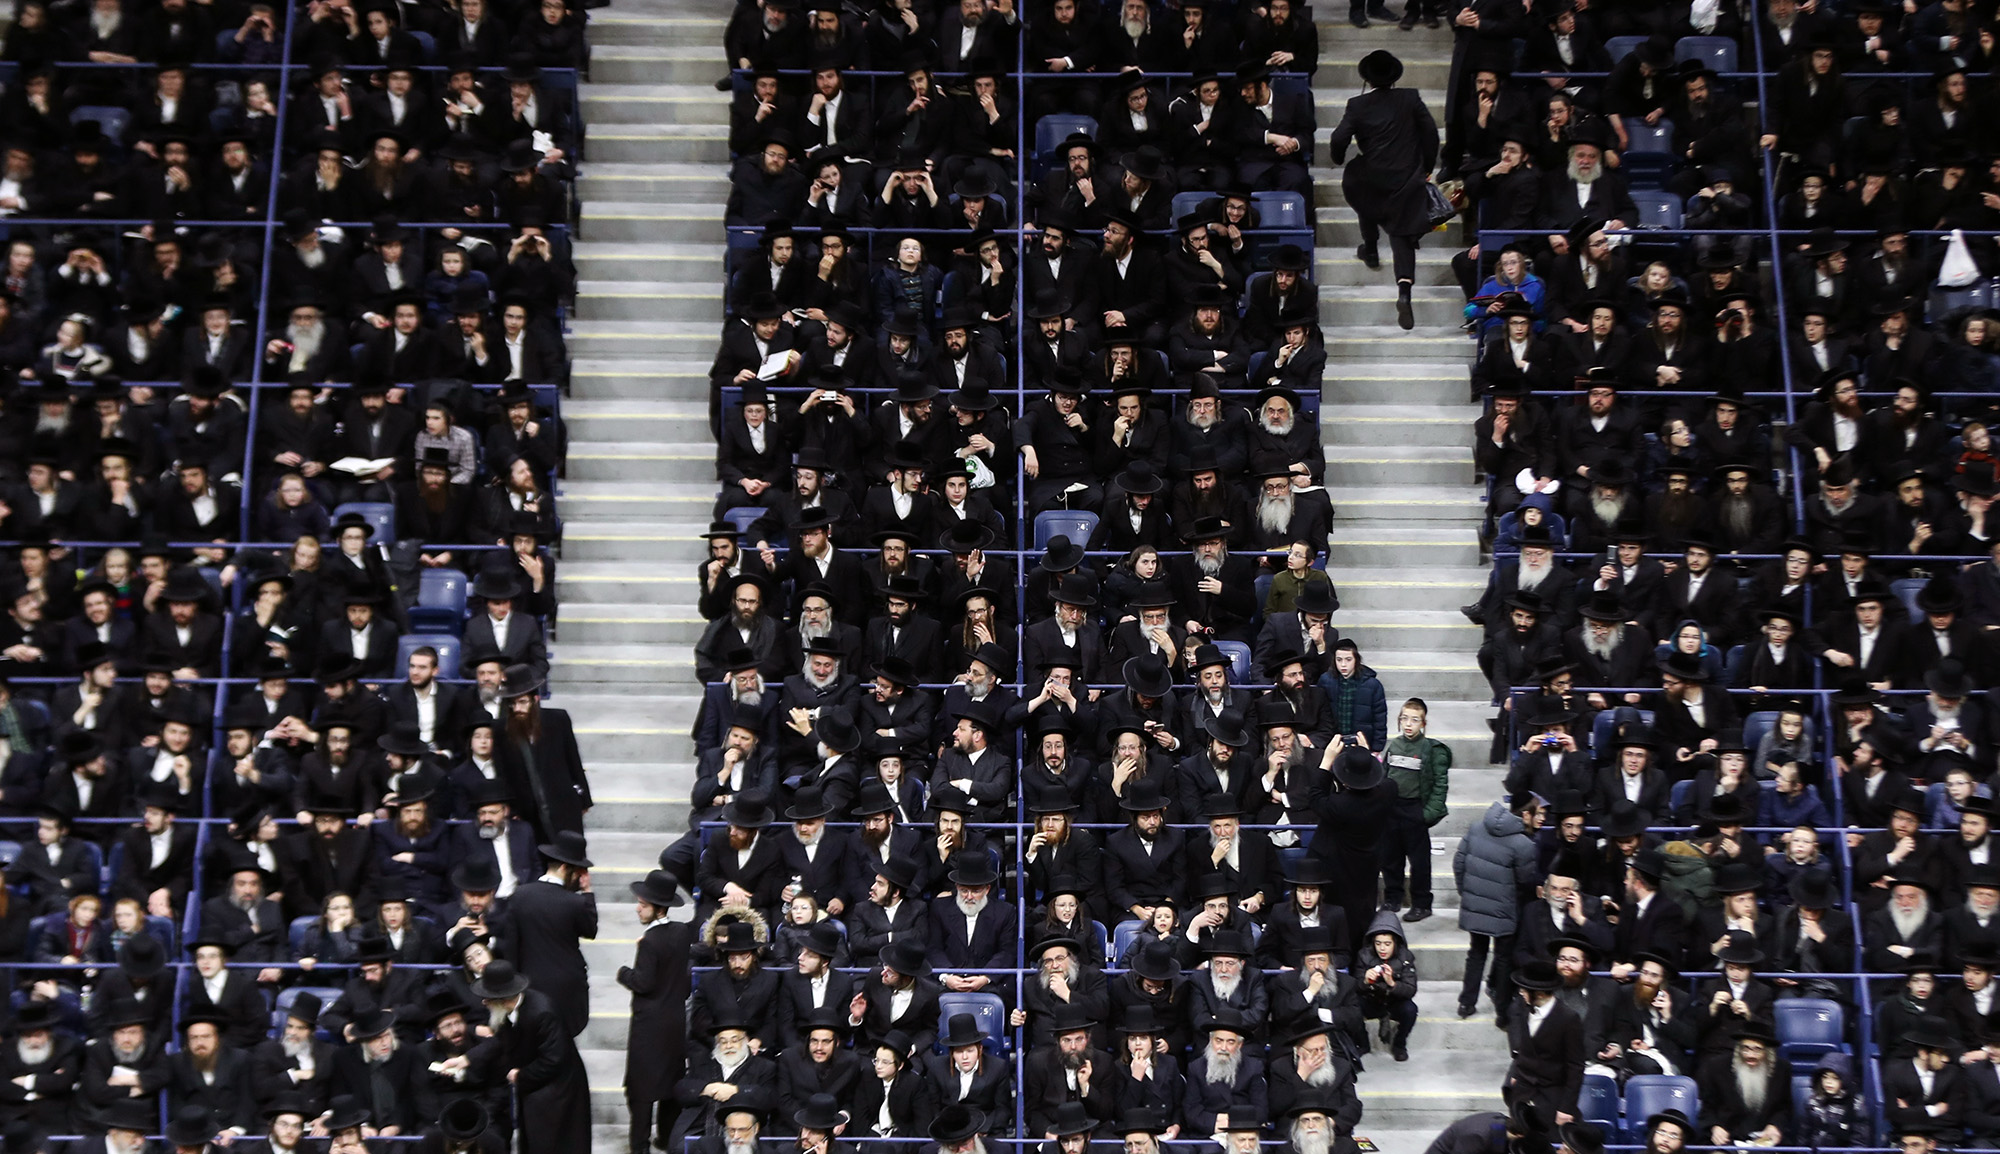 Thousands of haredi Jews gather at Arthur Ashe Stadium in Queens, New York to raise donations for educational institutions in Israel on April 12, 2019. Atilgan Ozdil/Anadolu Agency/Getty Images.
